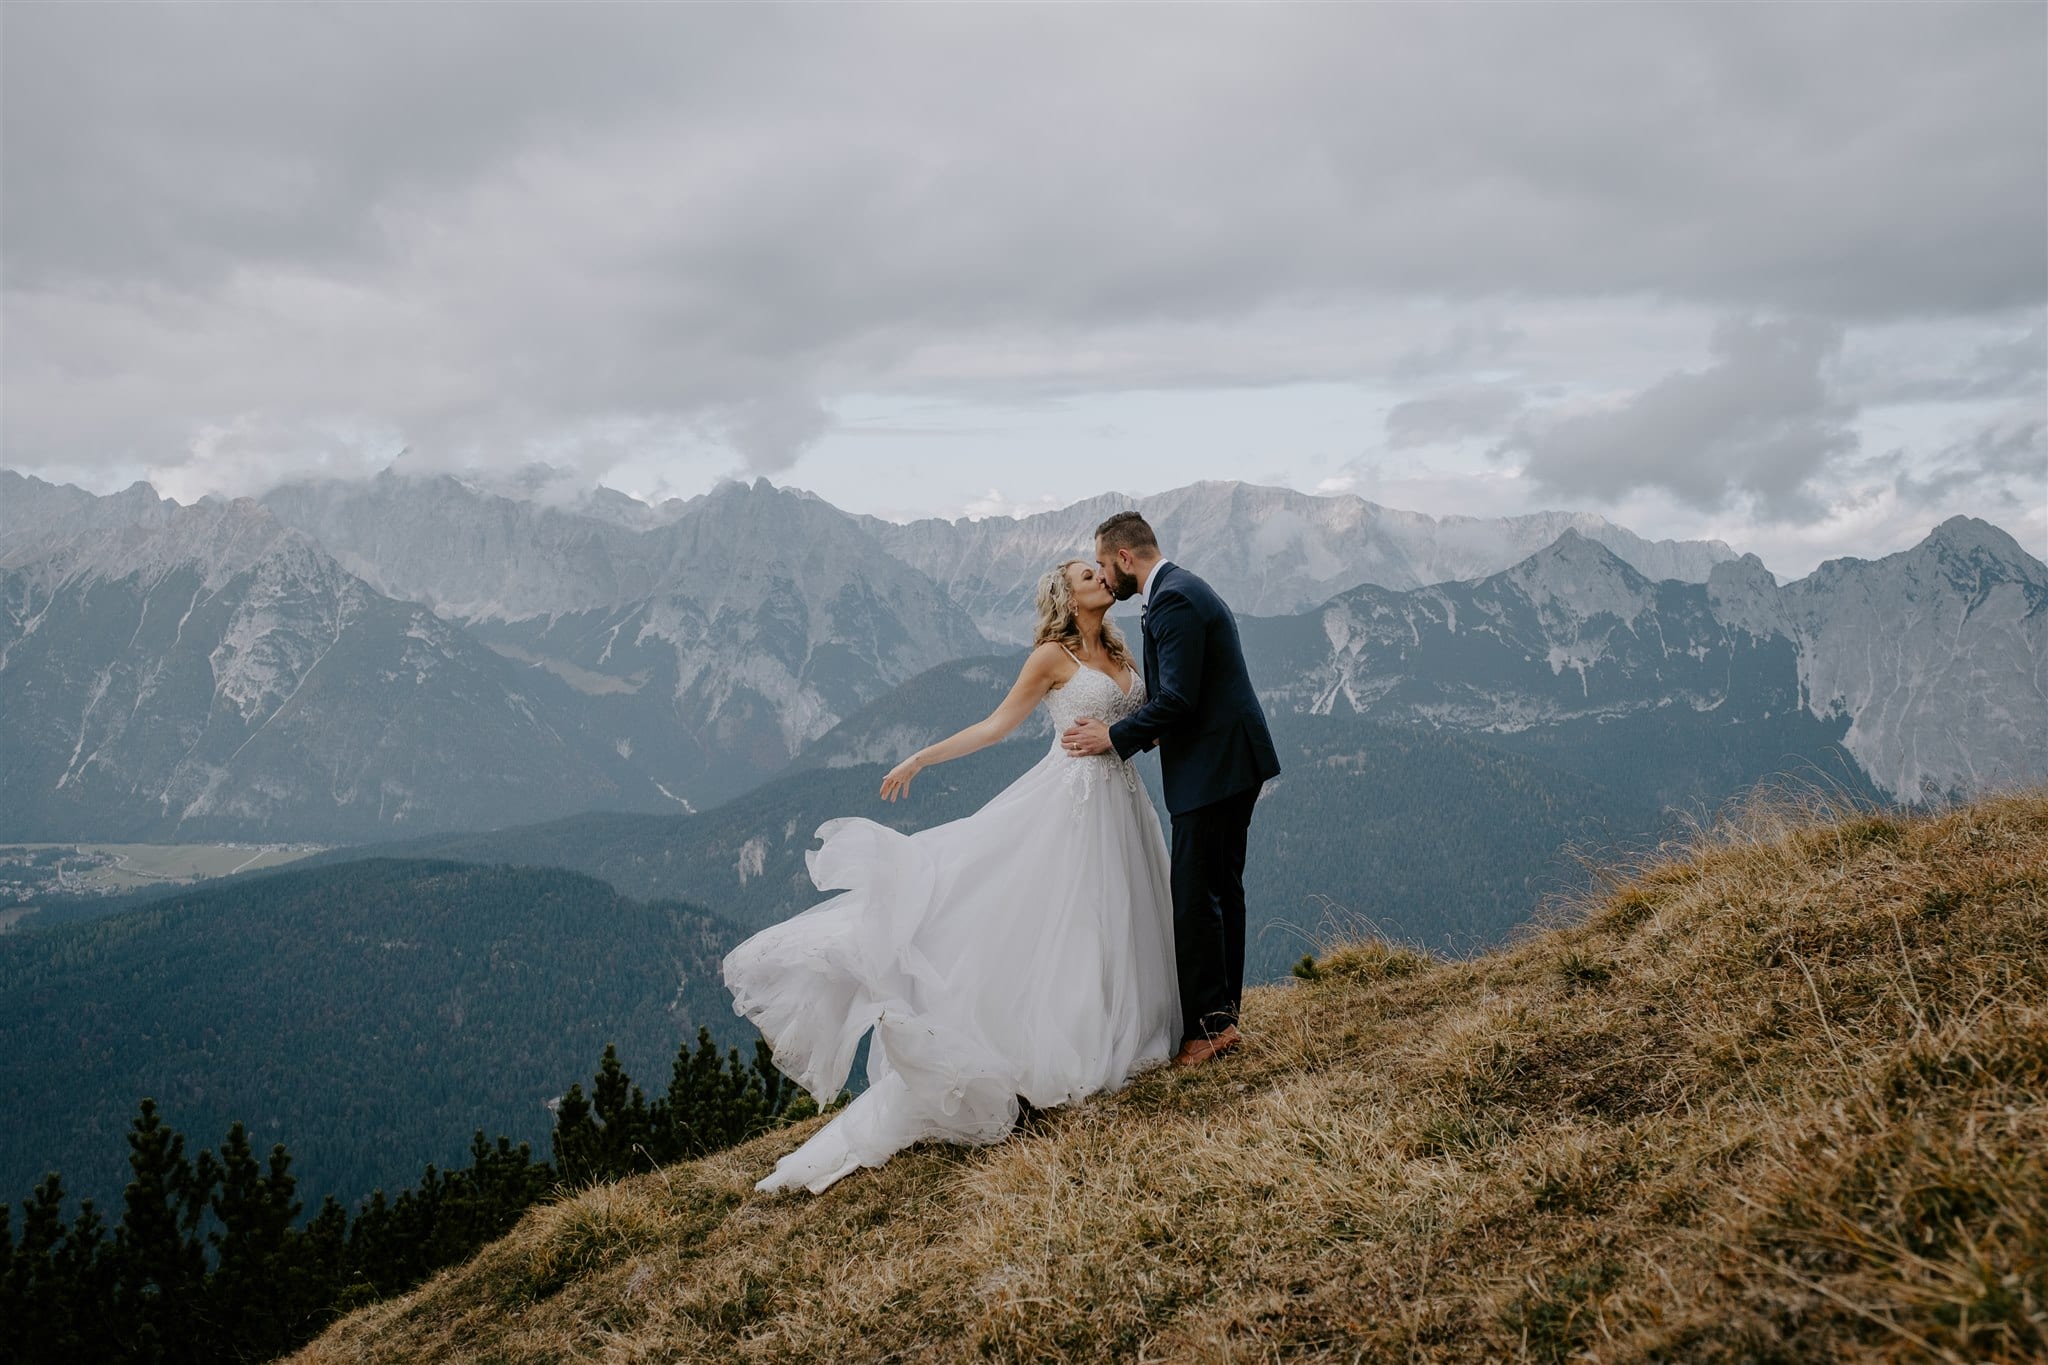 An elopement in Tirol, the bride and groom kiss on the top of a mountain as the dress blows in the wind